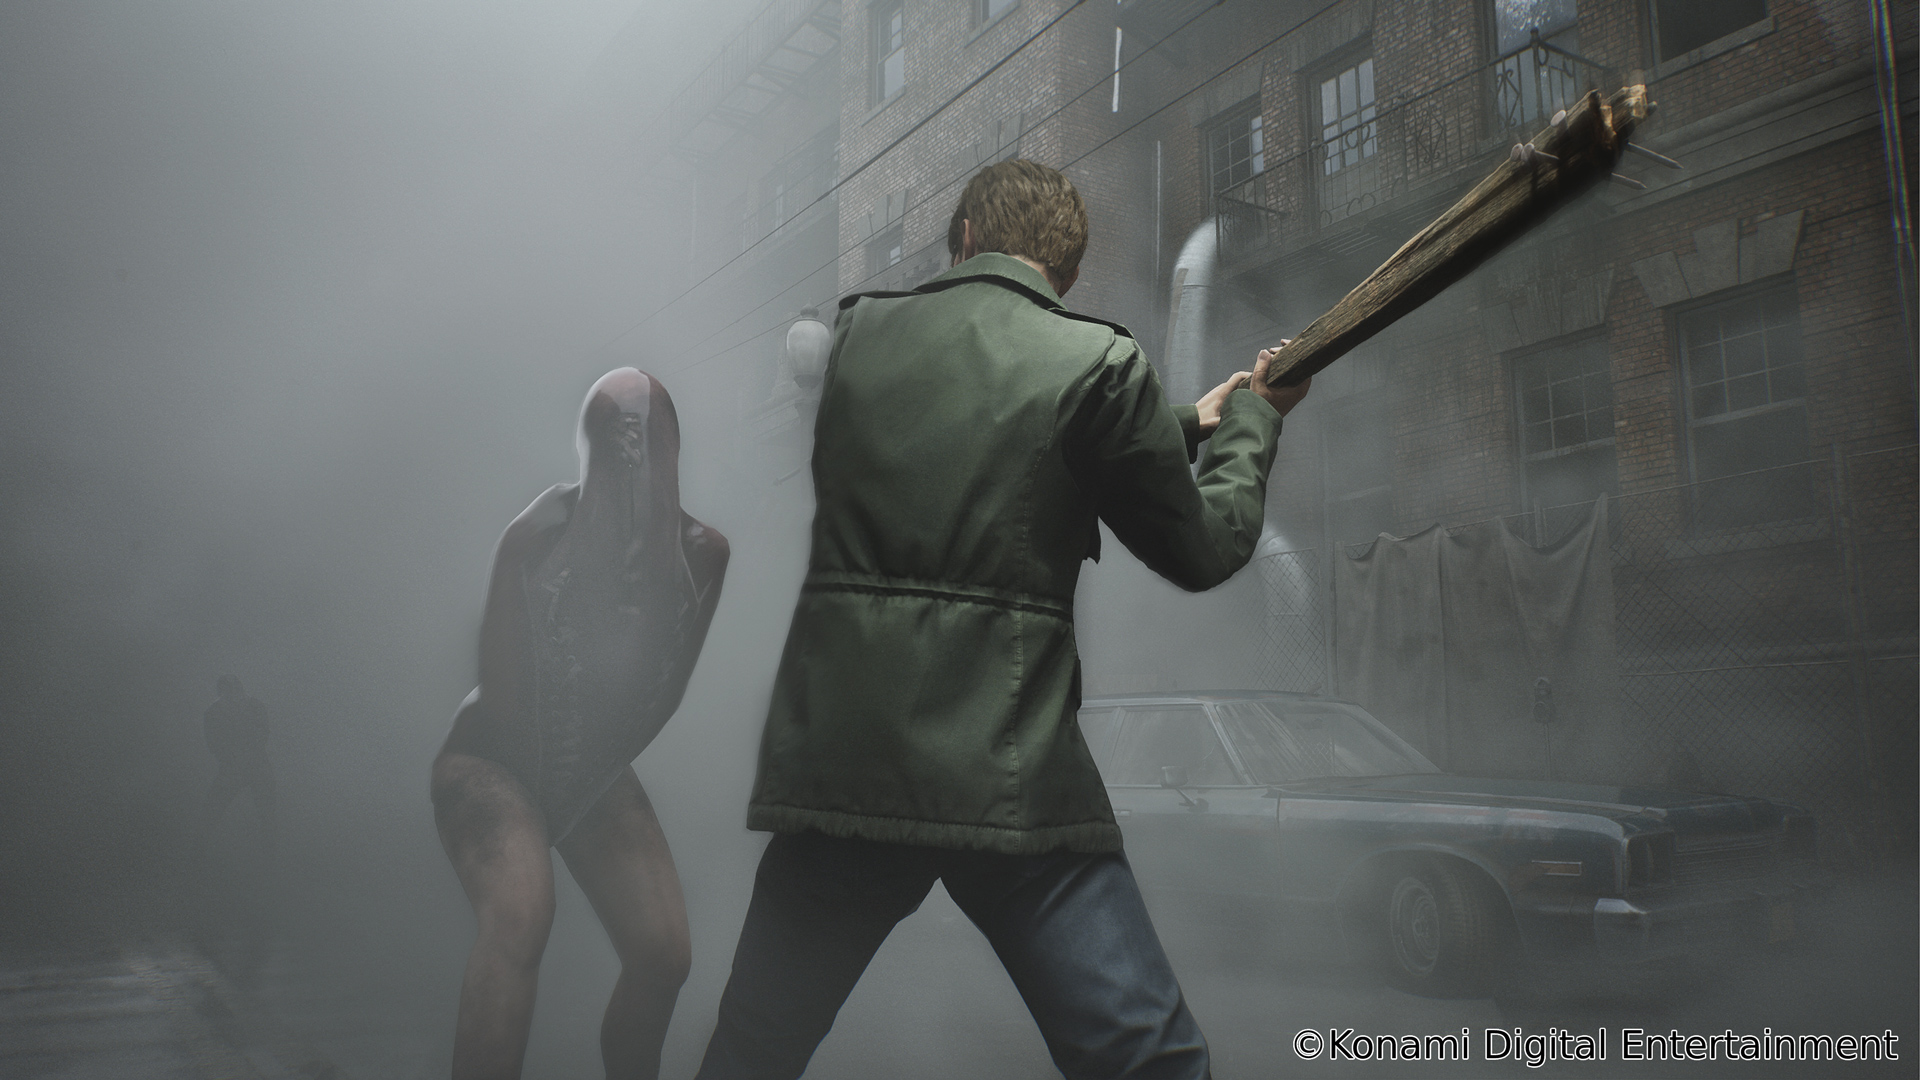 5 things fans expect from the rumored Silent Hill 2 Remake